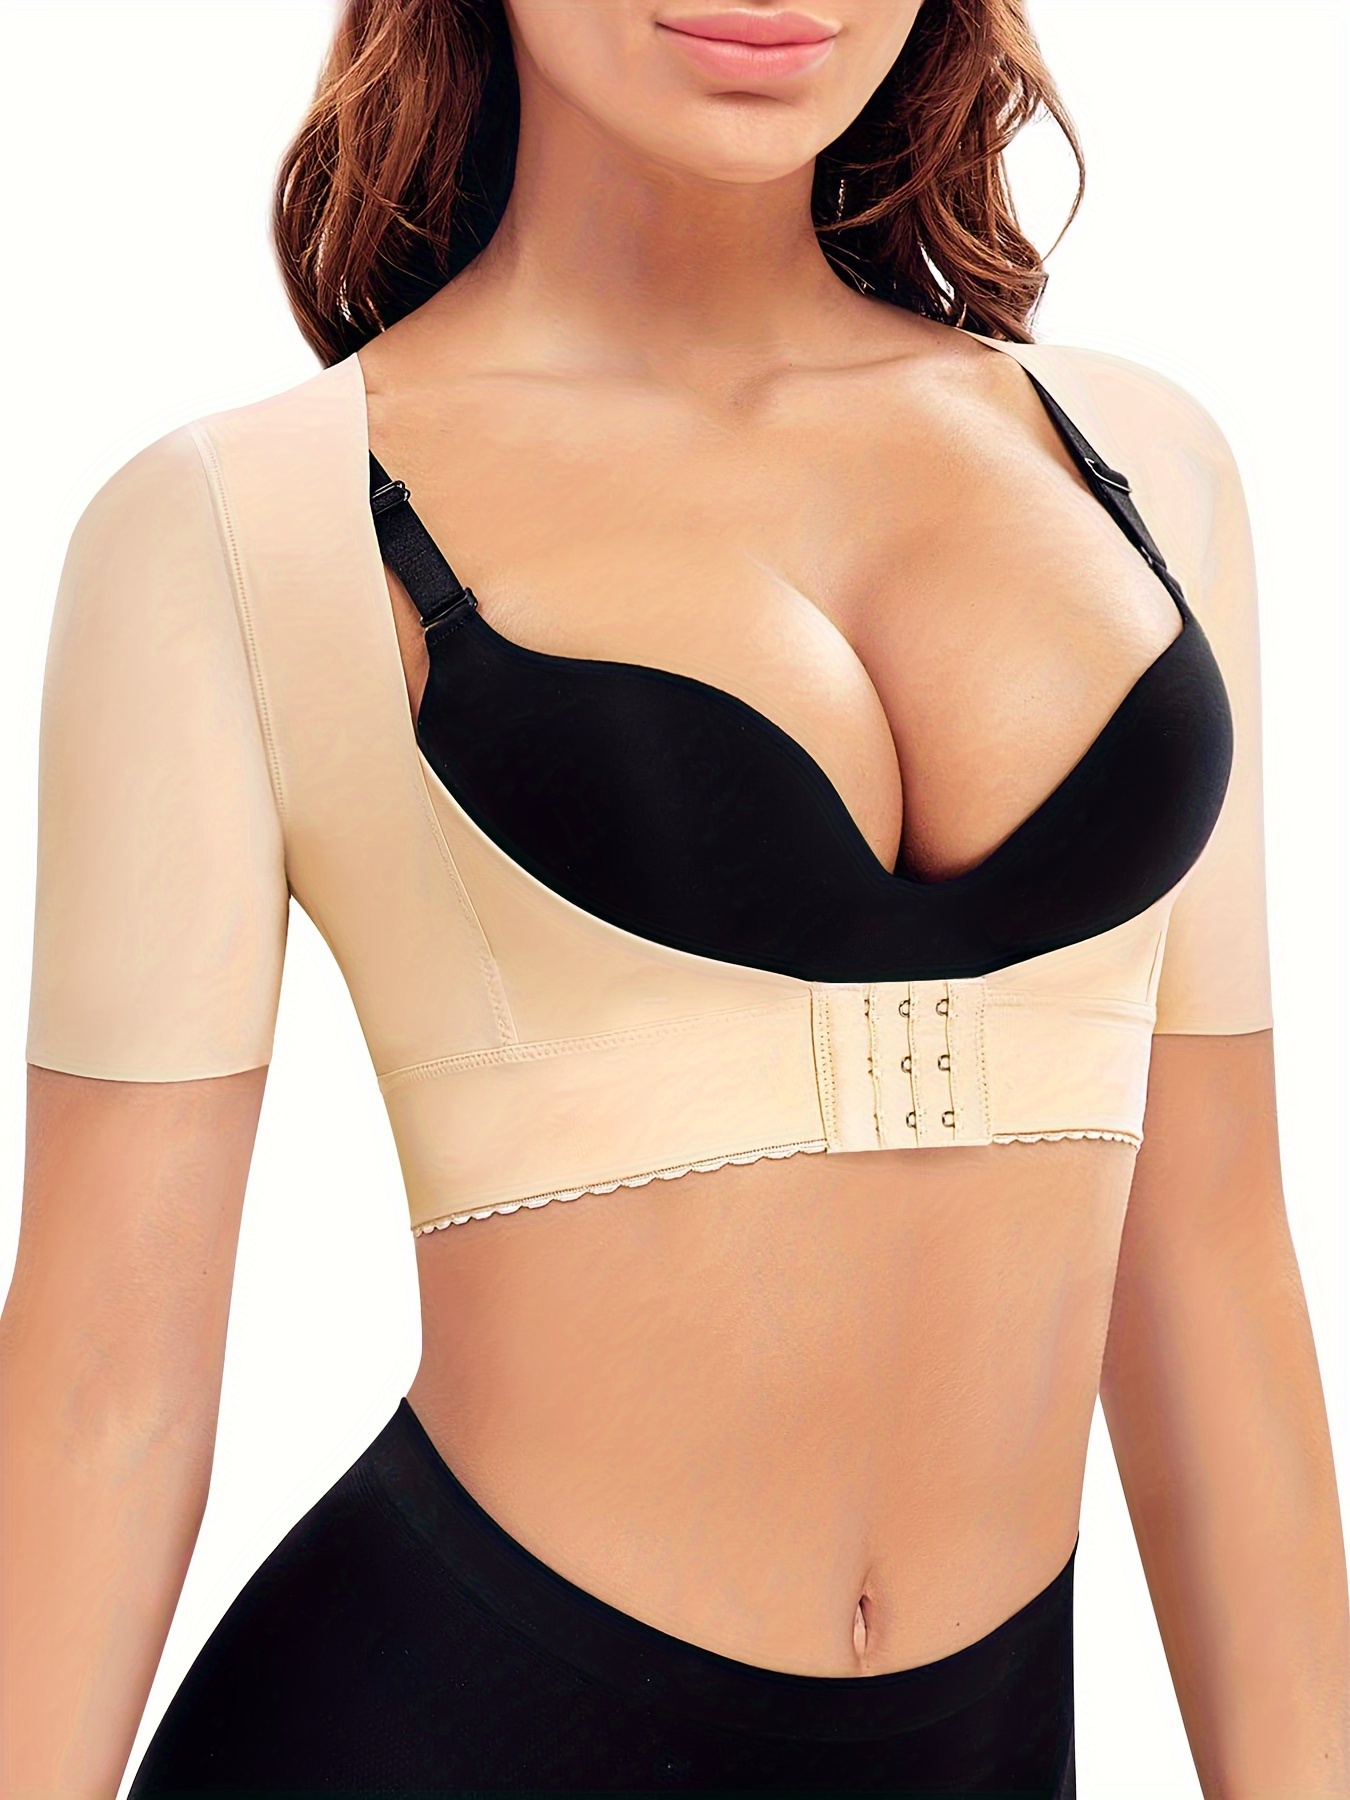 Pretty Comy 2 Pieces Posture Corrector Bra for Women Back Support Chest Up  Shapwear X-Shaper Compression Vest Under Clothes 